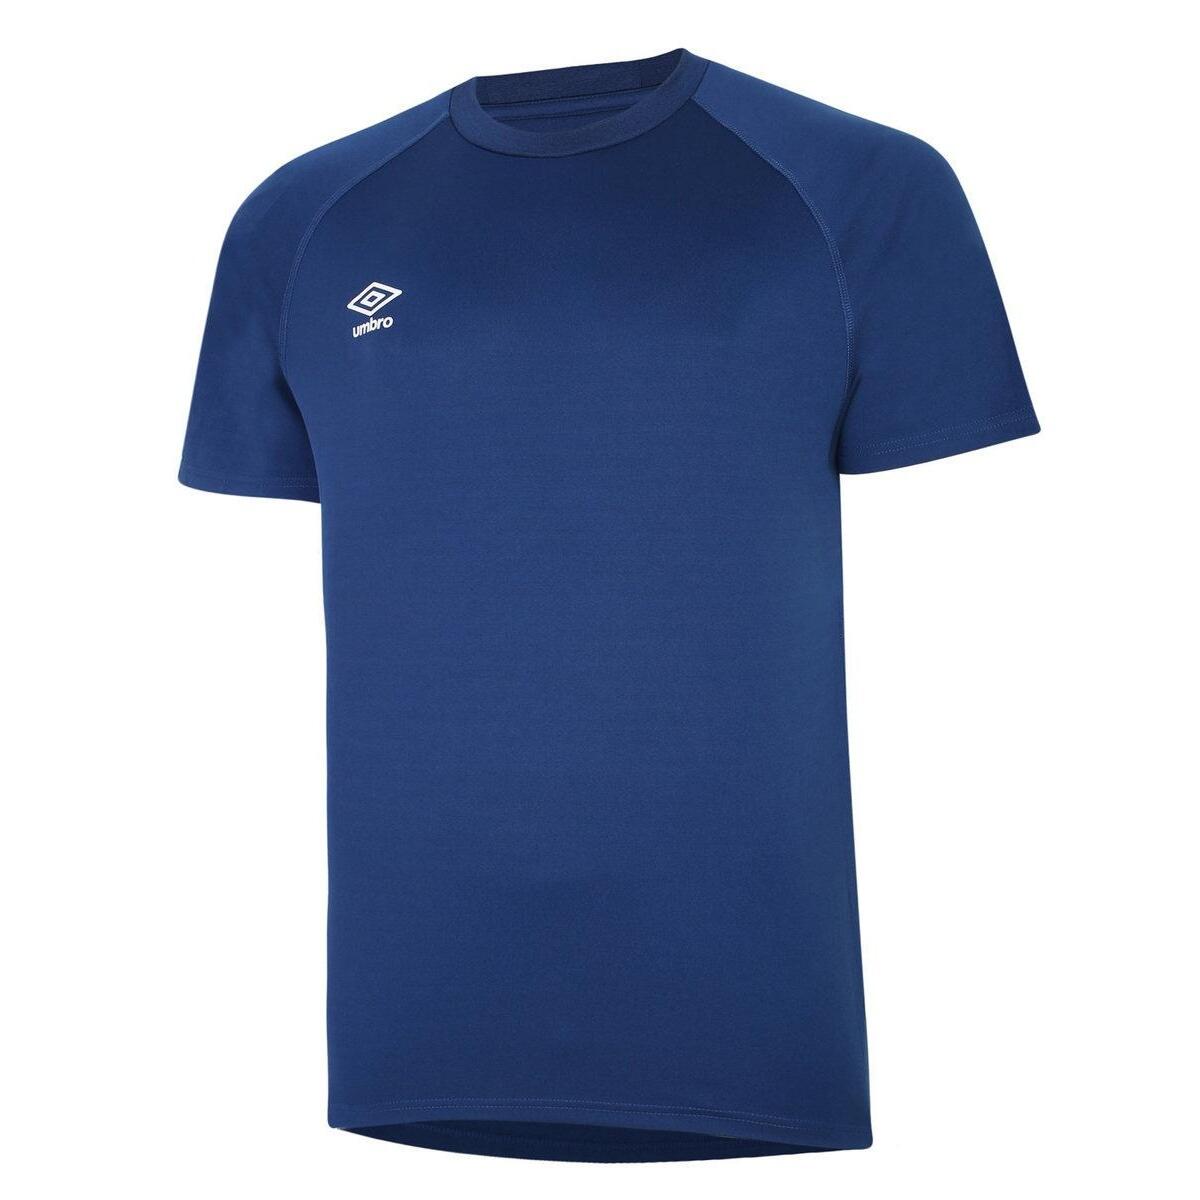 UMBRO Mens Rugby Drill Top (Navy)